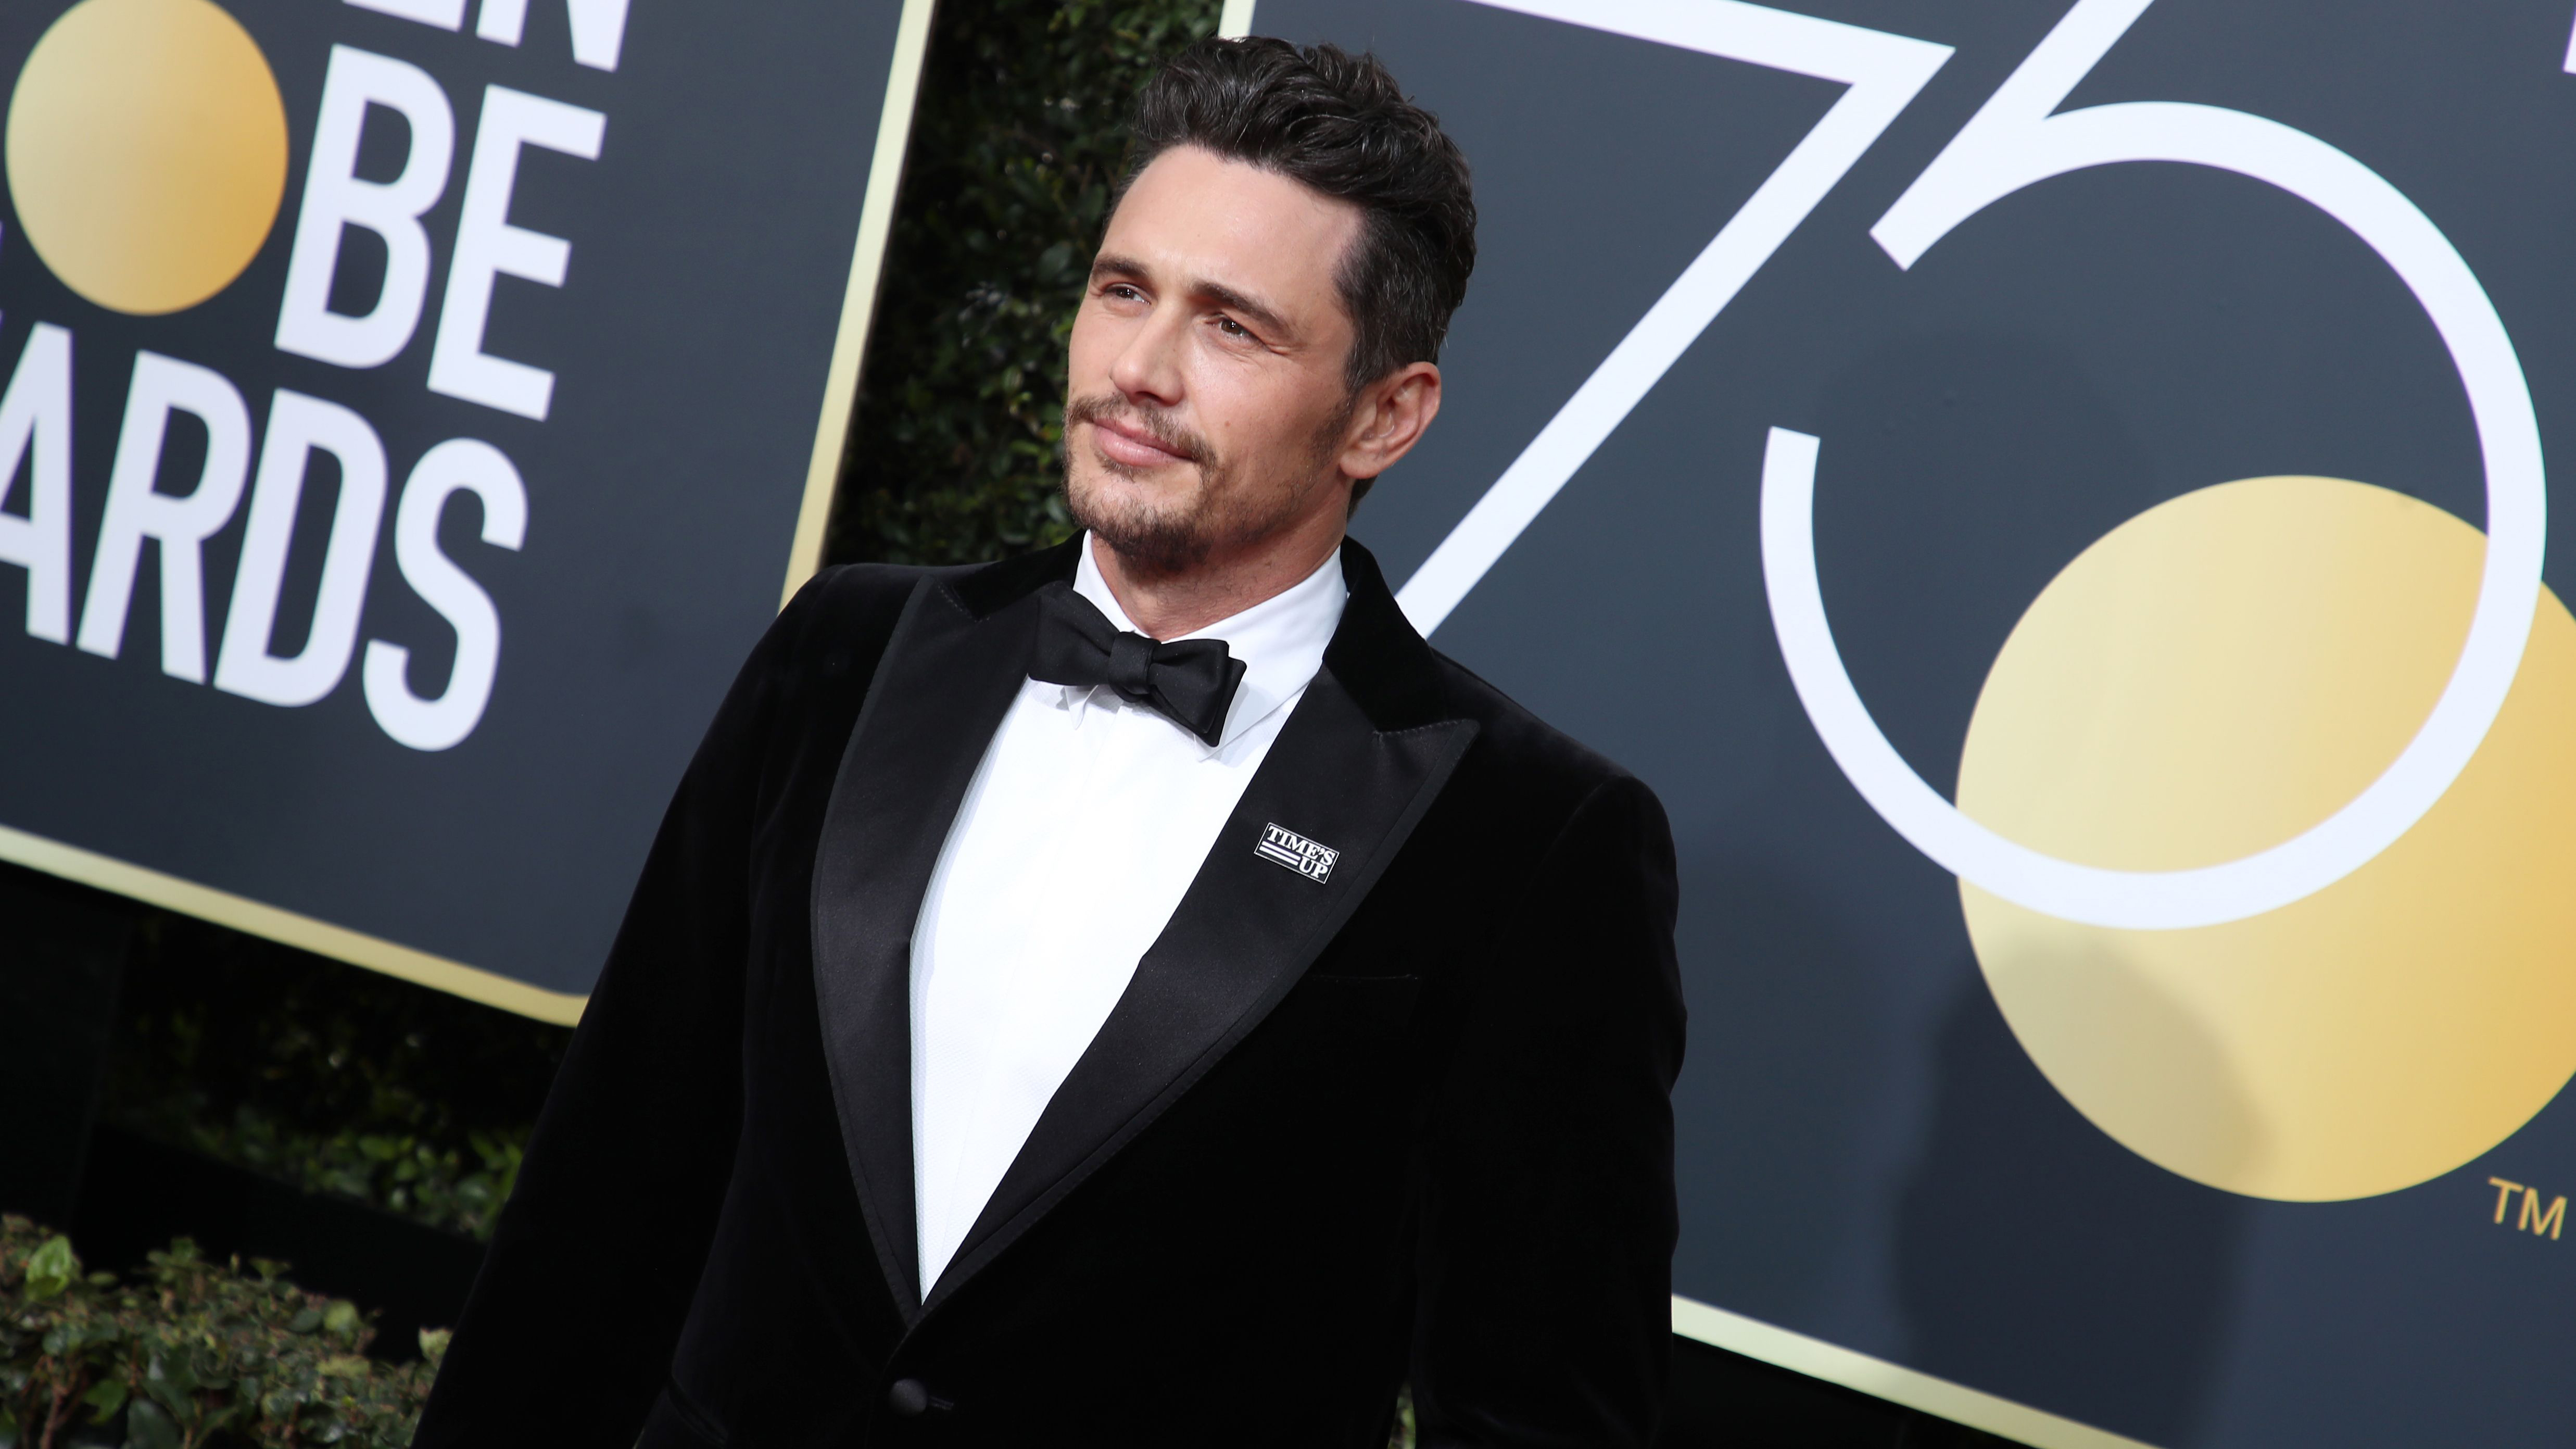 Amber Heard's lawyers have included actor James Franco on their list of potential witnesses at trial (Chelsea Lauren/EIB/Shutterstock)